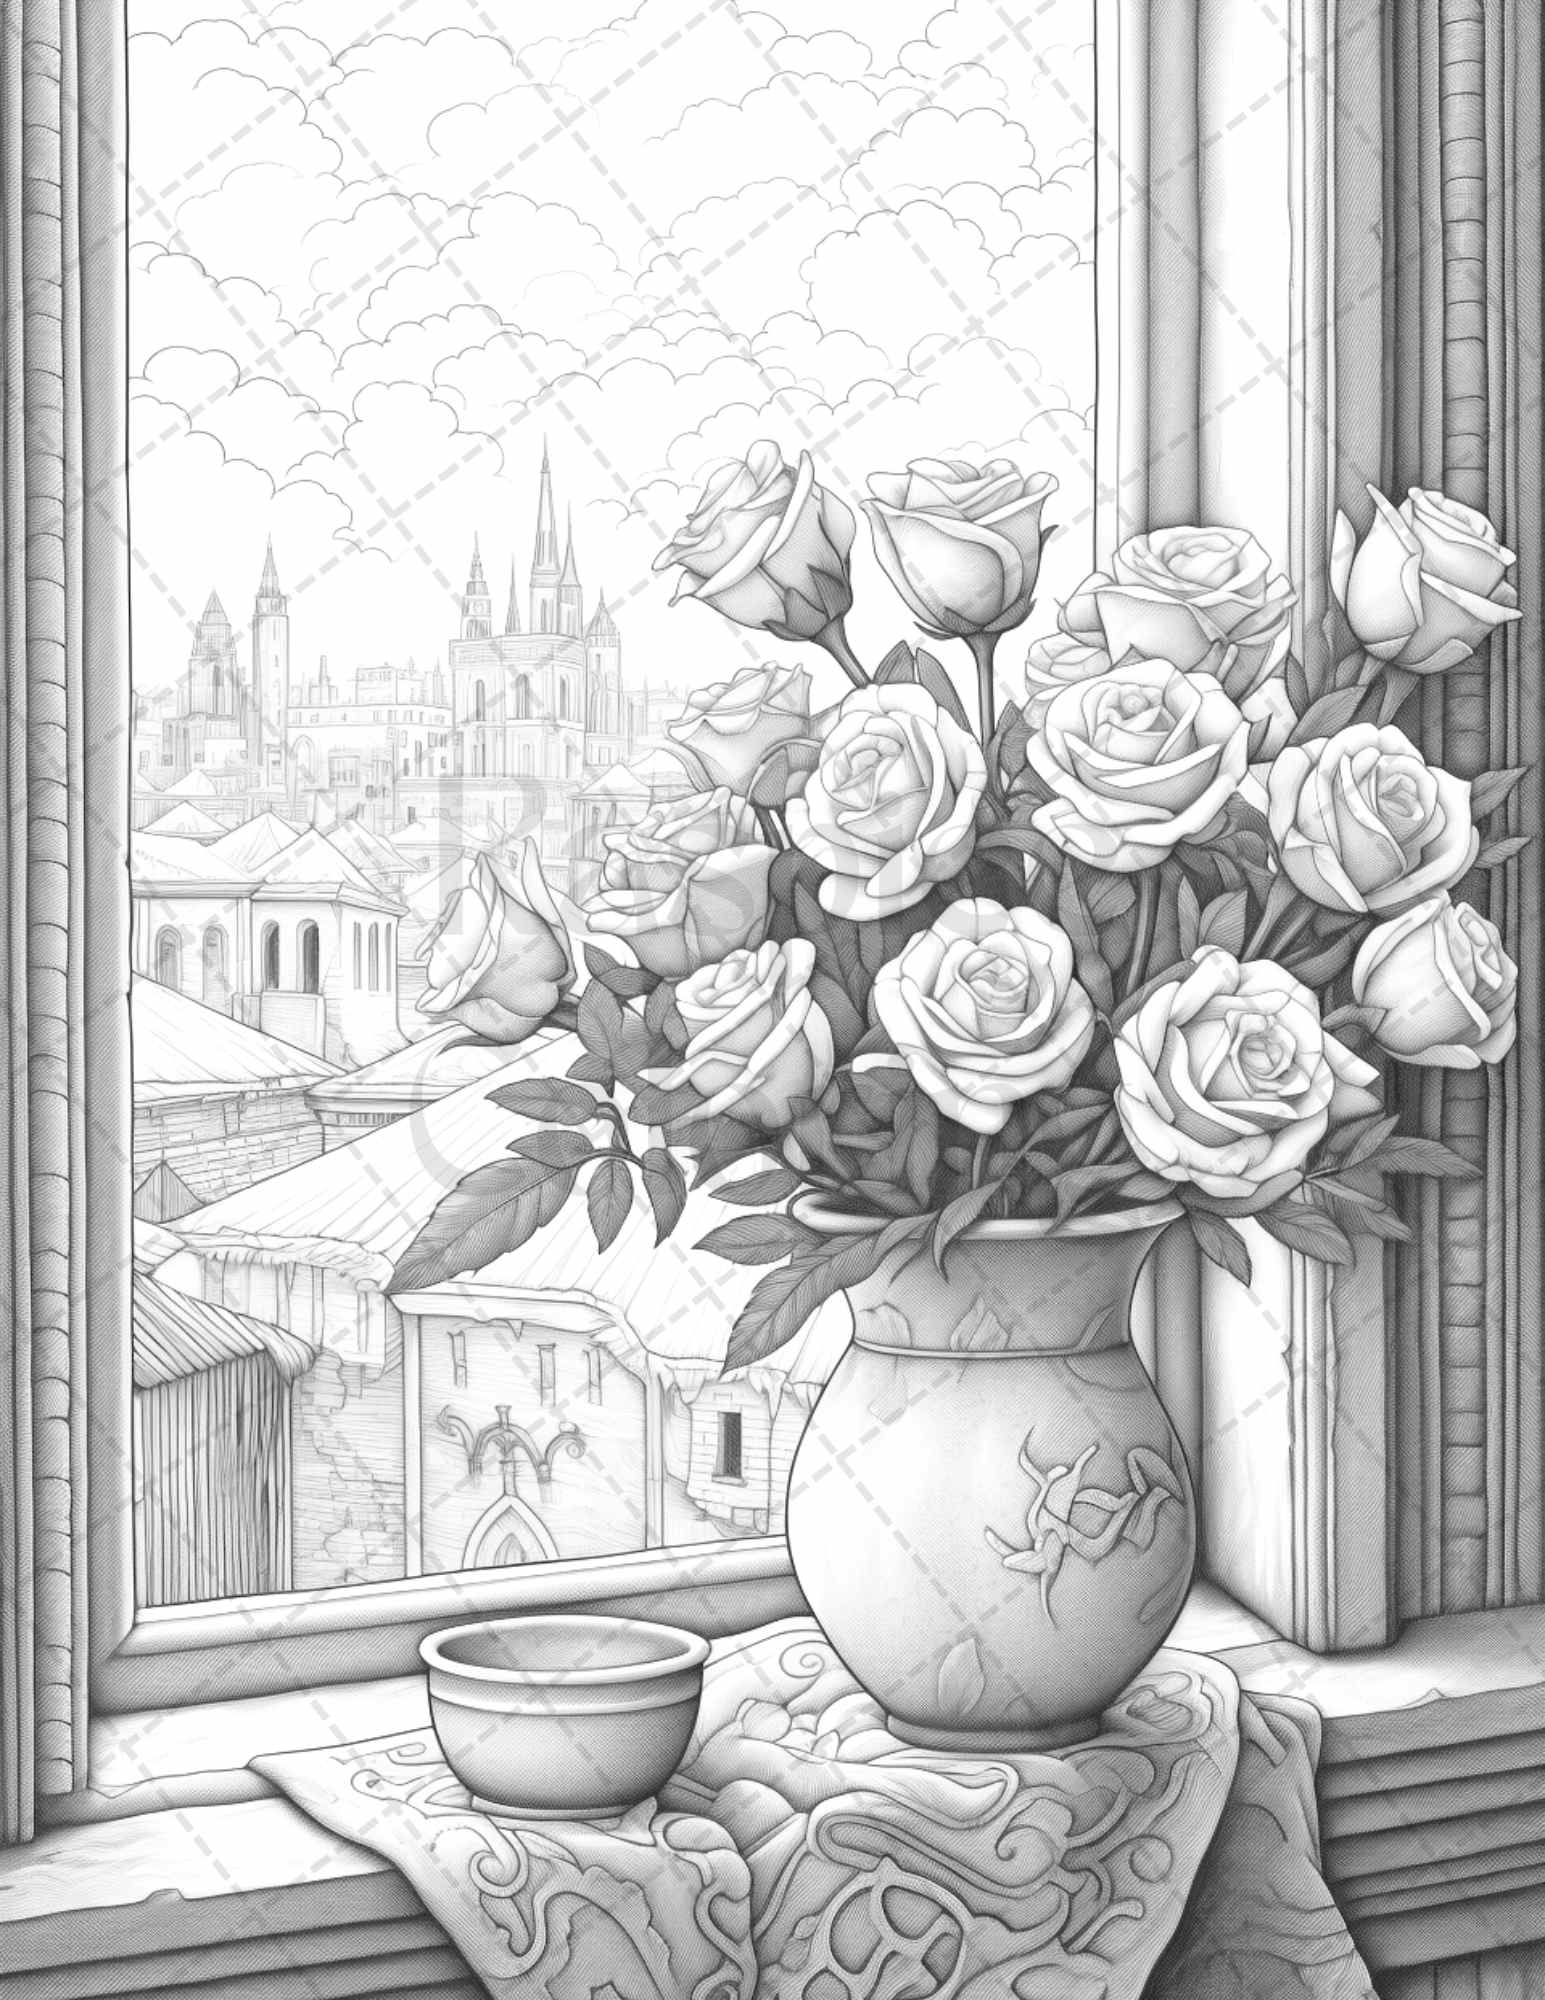 grayscale coloring page with captivating roses, printable adult coloring page with roses in grayscale, rose drawings for grayscale coloring, floral grayscale coloring sheet for adults, high-quality grayscale art with rose patterns